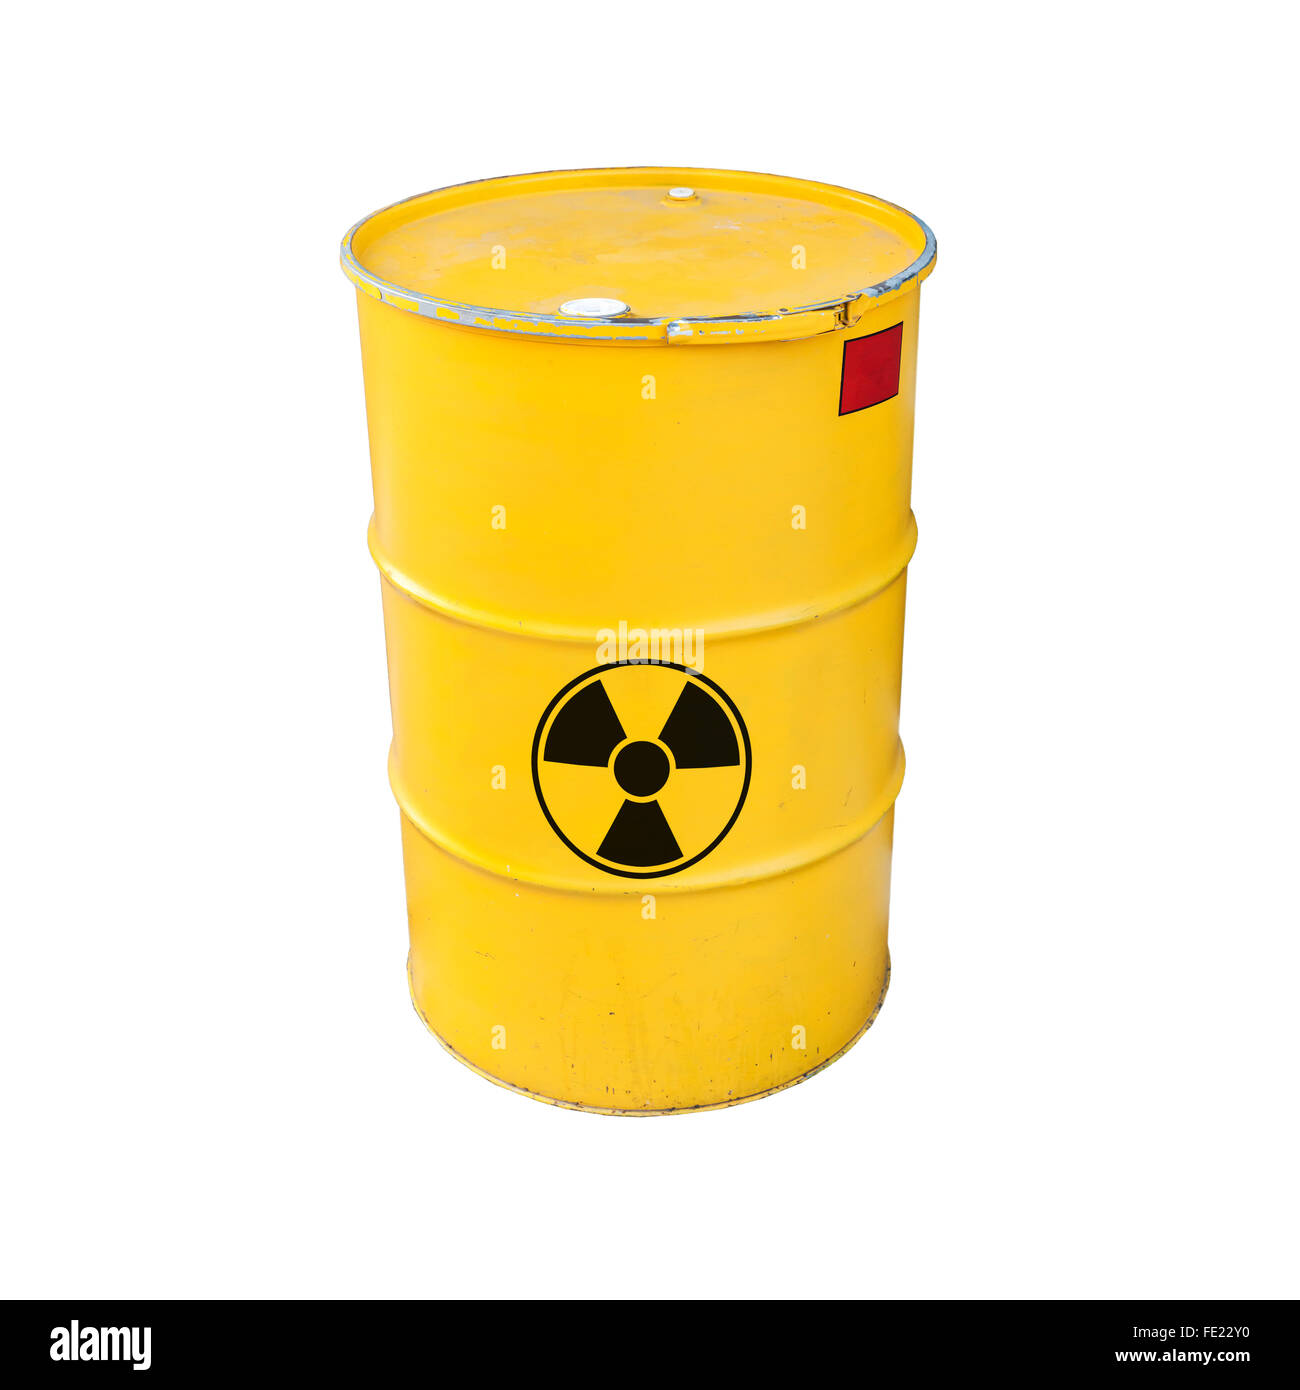 Yellow metal barrel with black radioactive warning sign isolated on white background Stock Photo